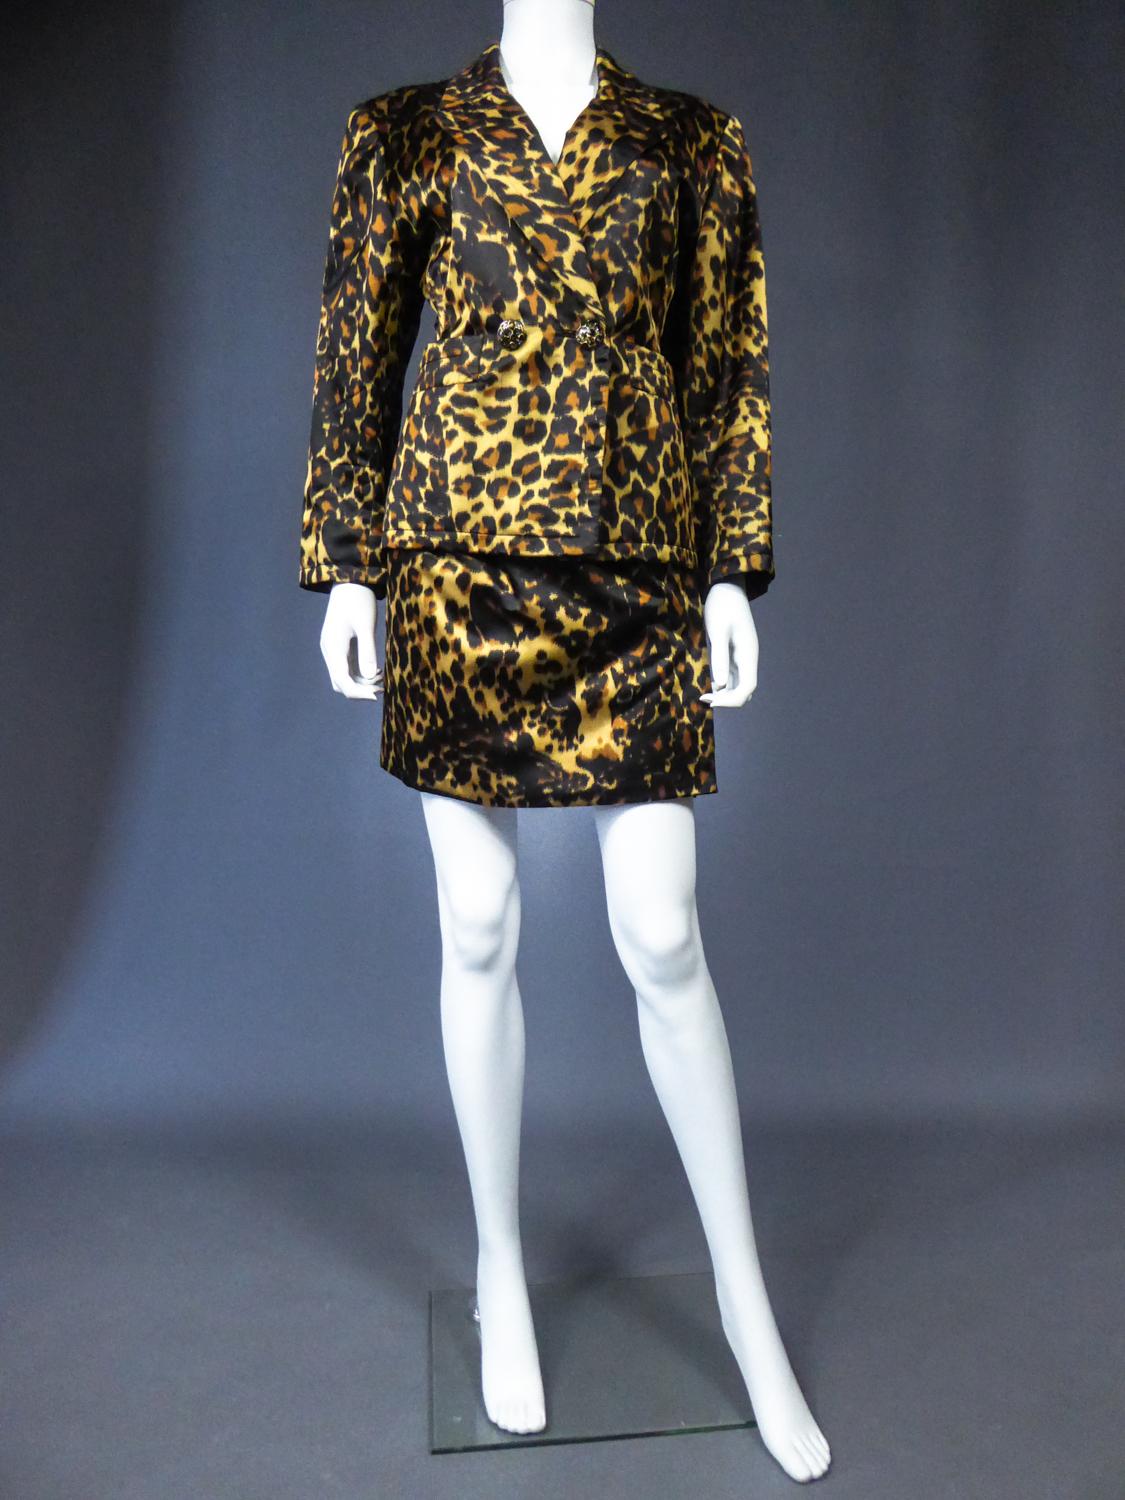 Black Yves Saint Laurent Printed Panther Satin (attributed to) Skirt Suit Circa 1990 For Sale